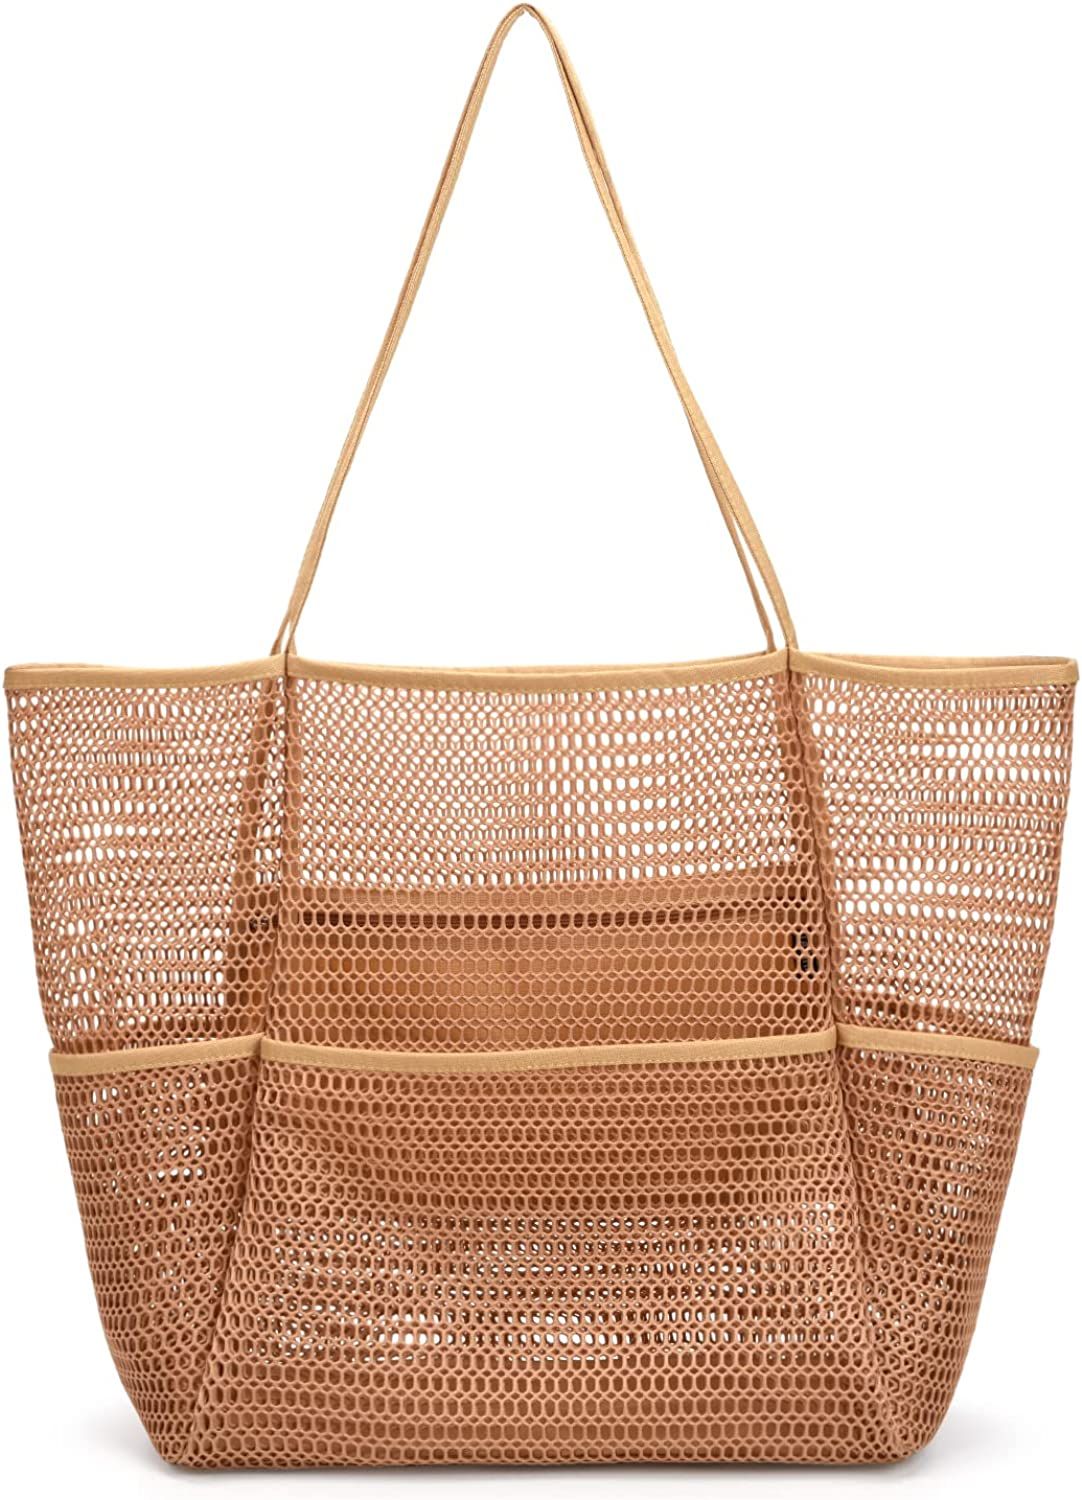 Tainehs Mesh Beach Tote Large Bag 2023 Upgrade for Women with Multiple Pockets for Family Travel Swi | Amazon (US)